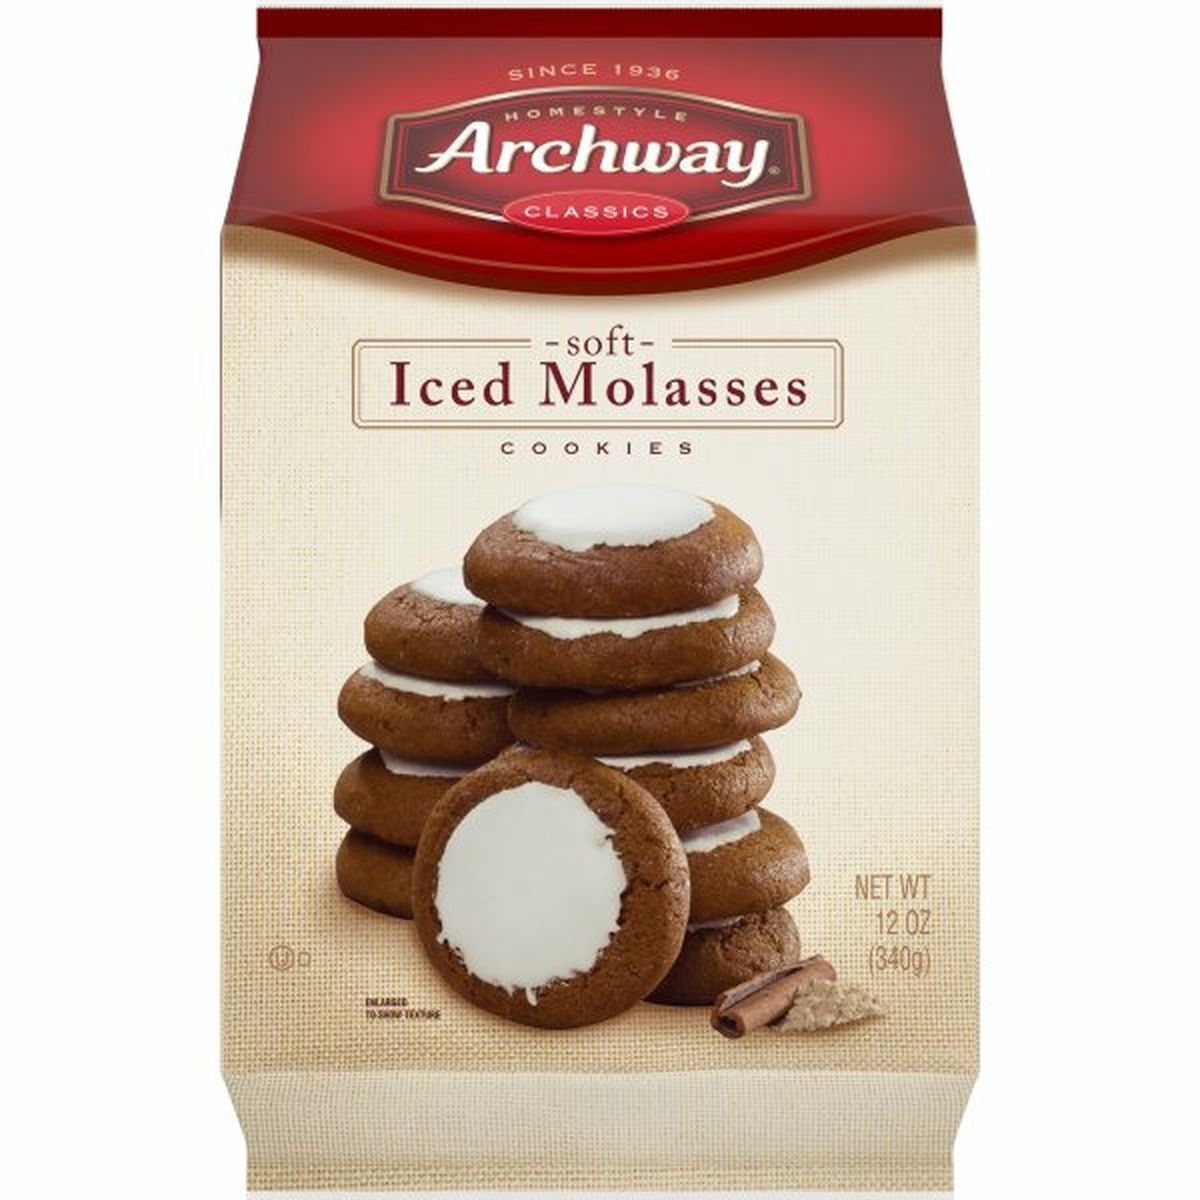 Calories in Archways Cookies, Iced Molasses, Soft